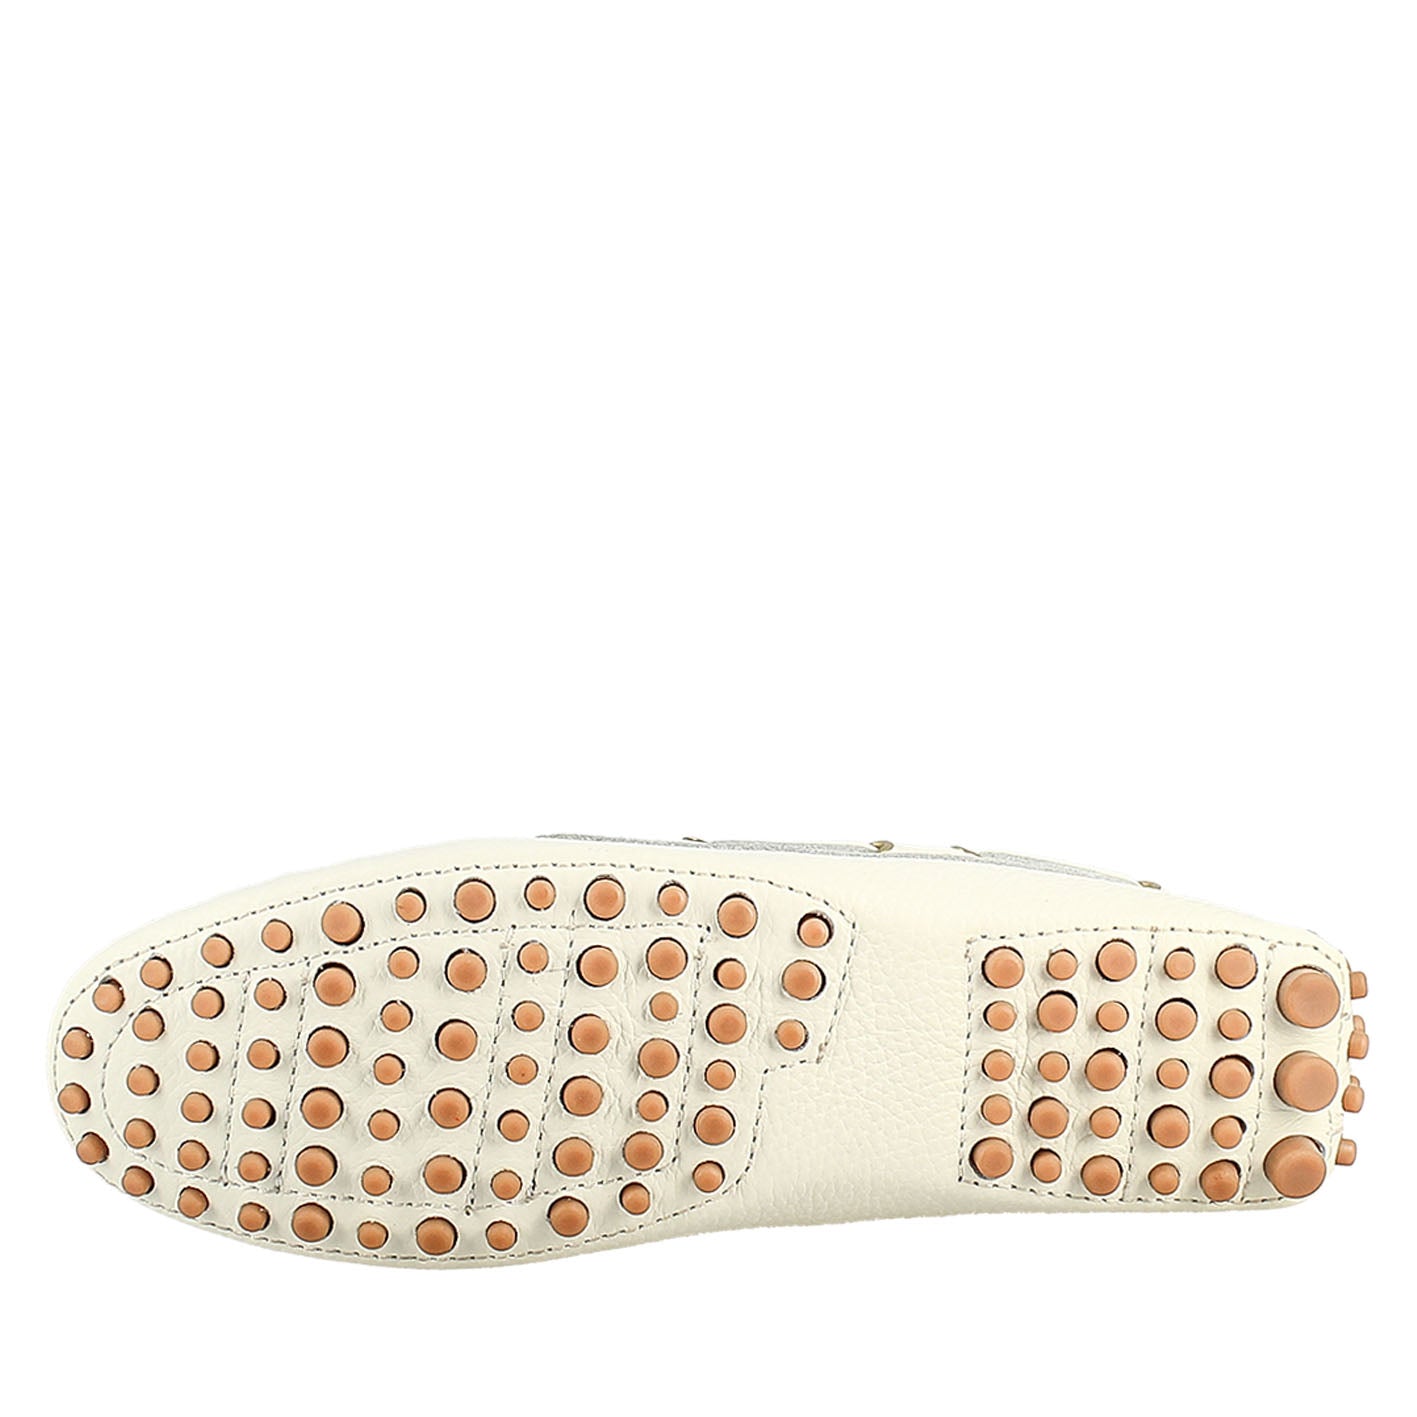 Women's moccasin with laces in white leather